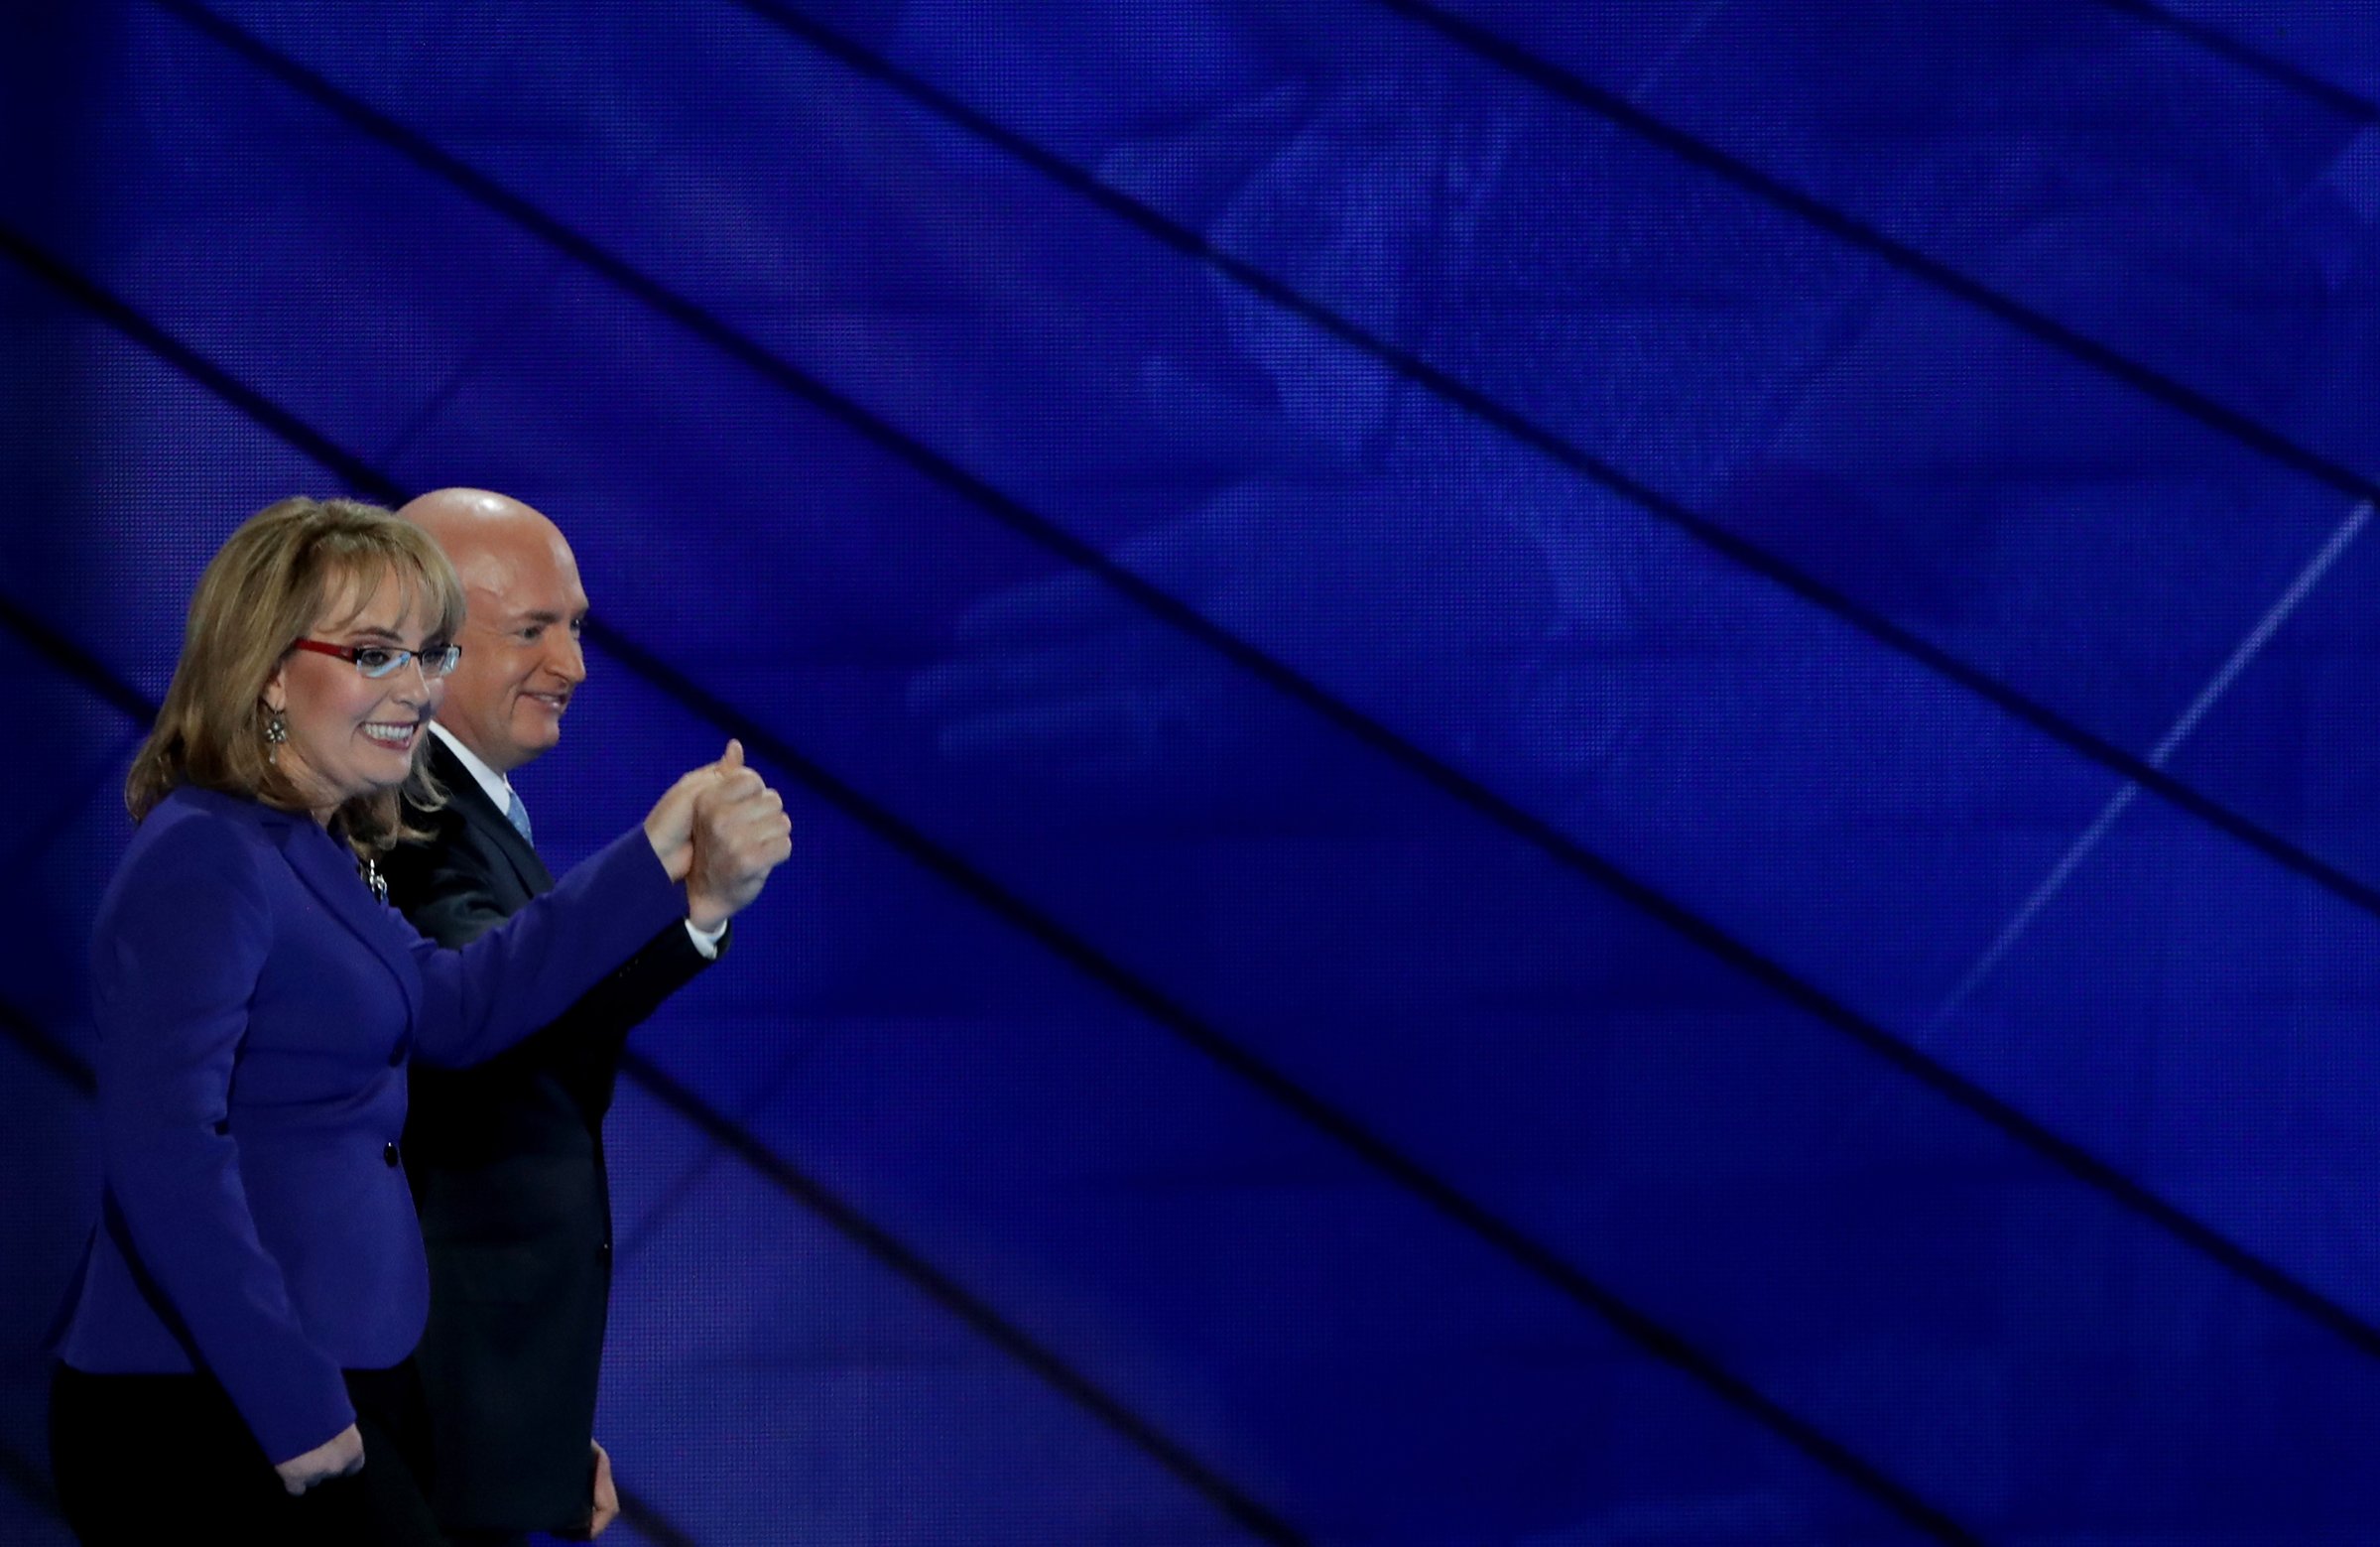 Former Congresswoman Gabby Giffords and her husband, retired NASA Astronaut and Navy Captain Mark Kelly, hold hands as they walk off stage on the third day of the Democratic National Convention, July 27, 2016 in Philadelphia.